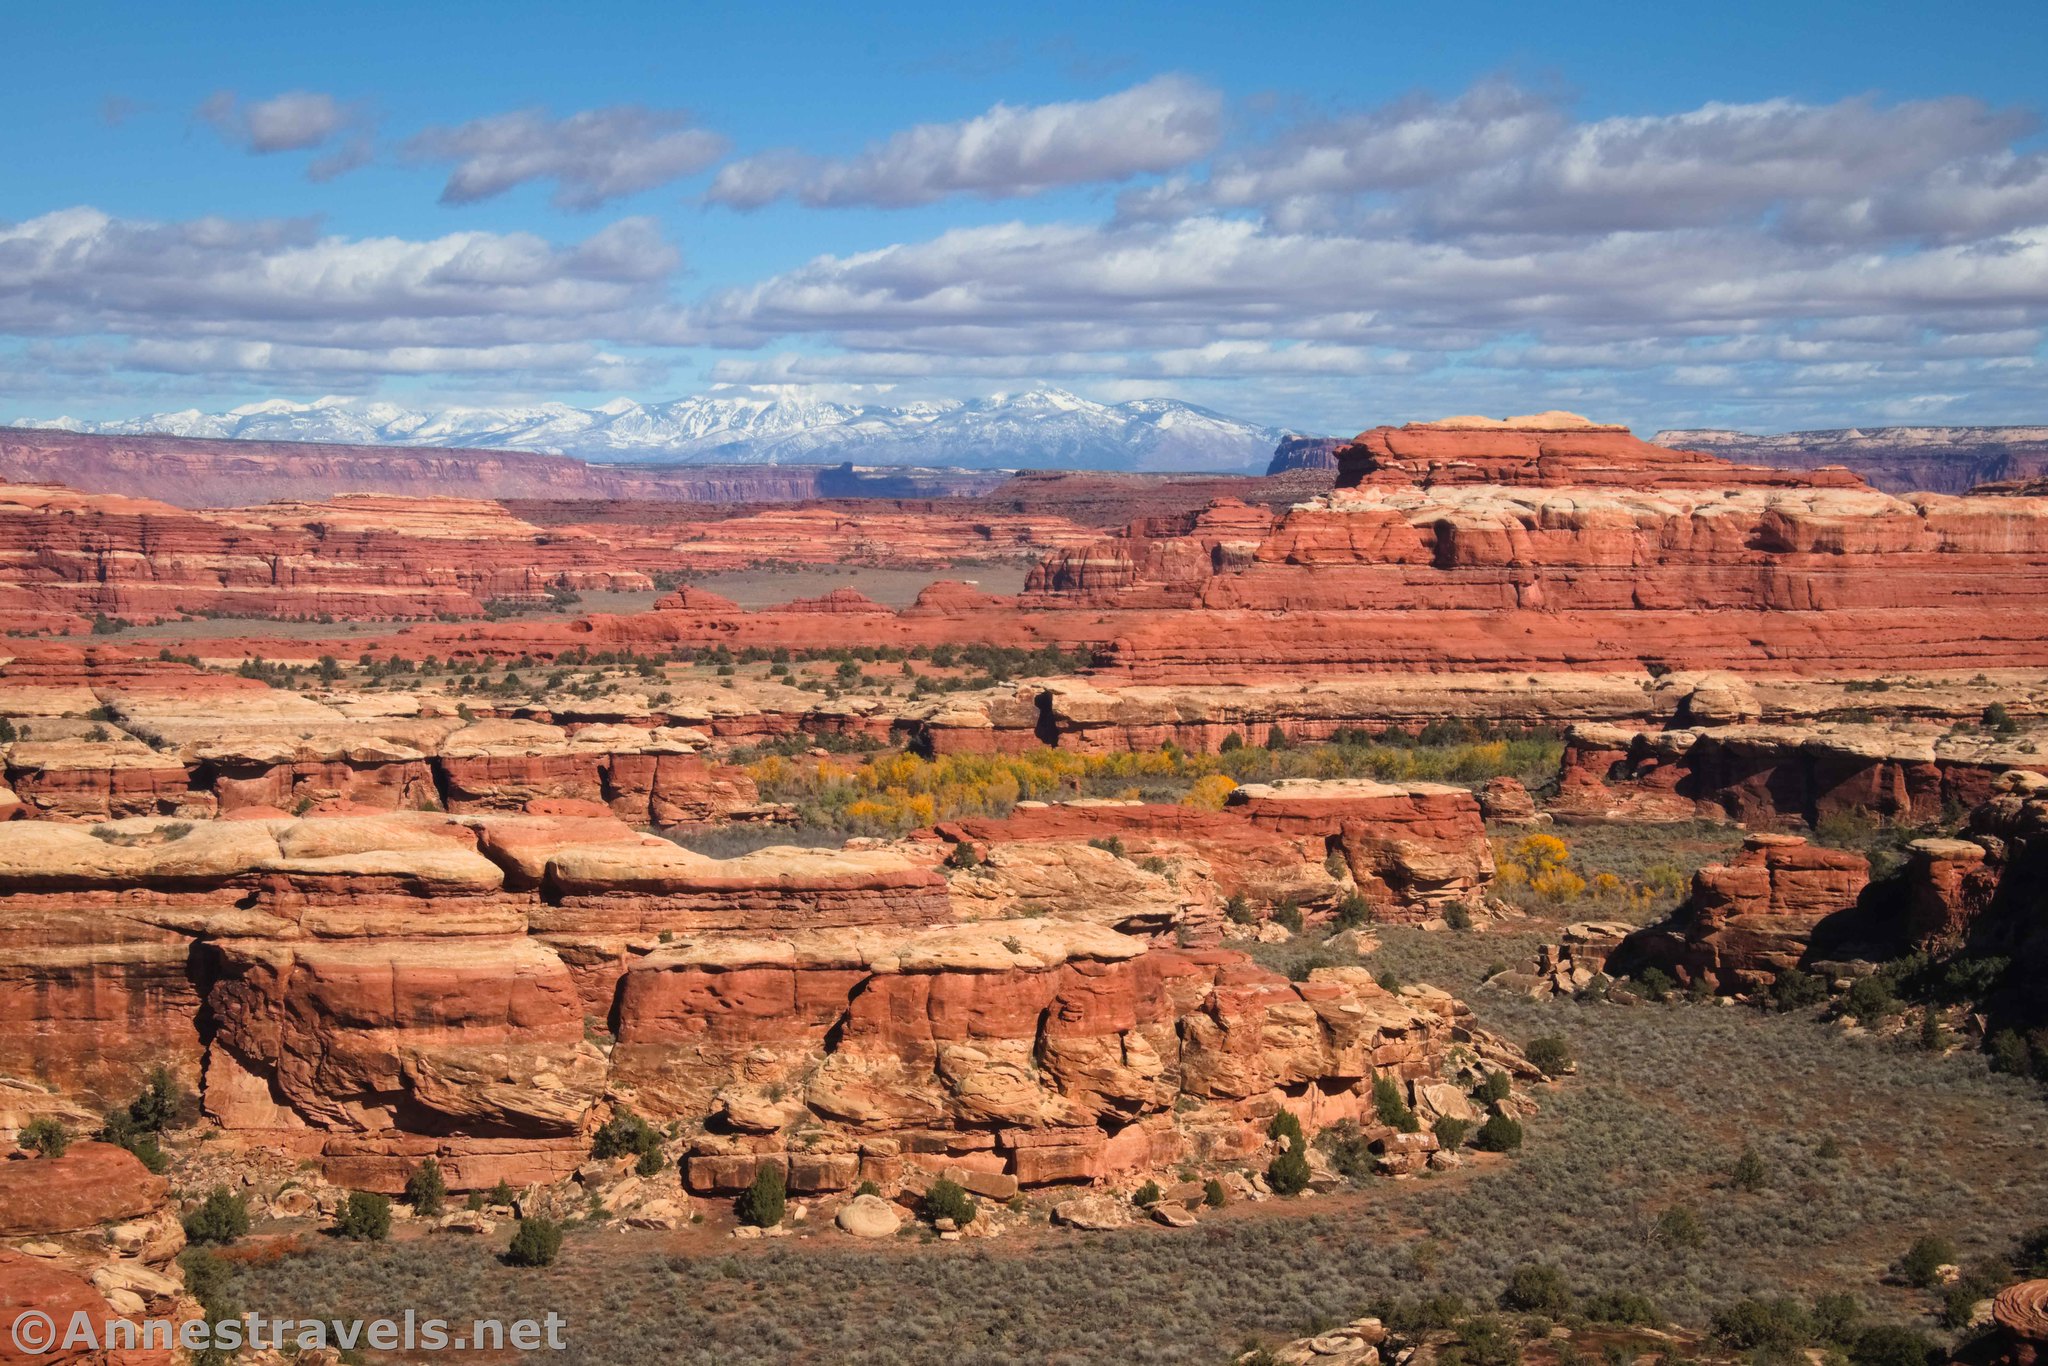 The La Sal Mountains from the Peek-a-boo Trail in Canyonlands National Park, Utah